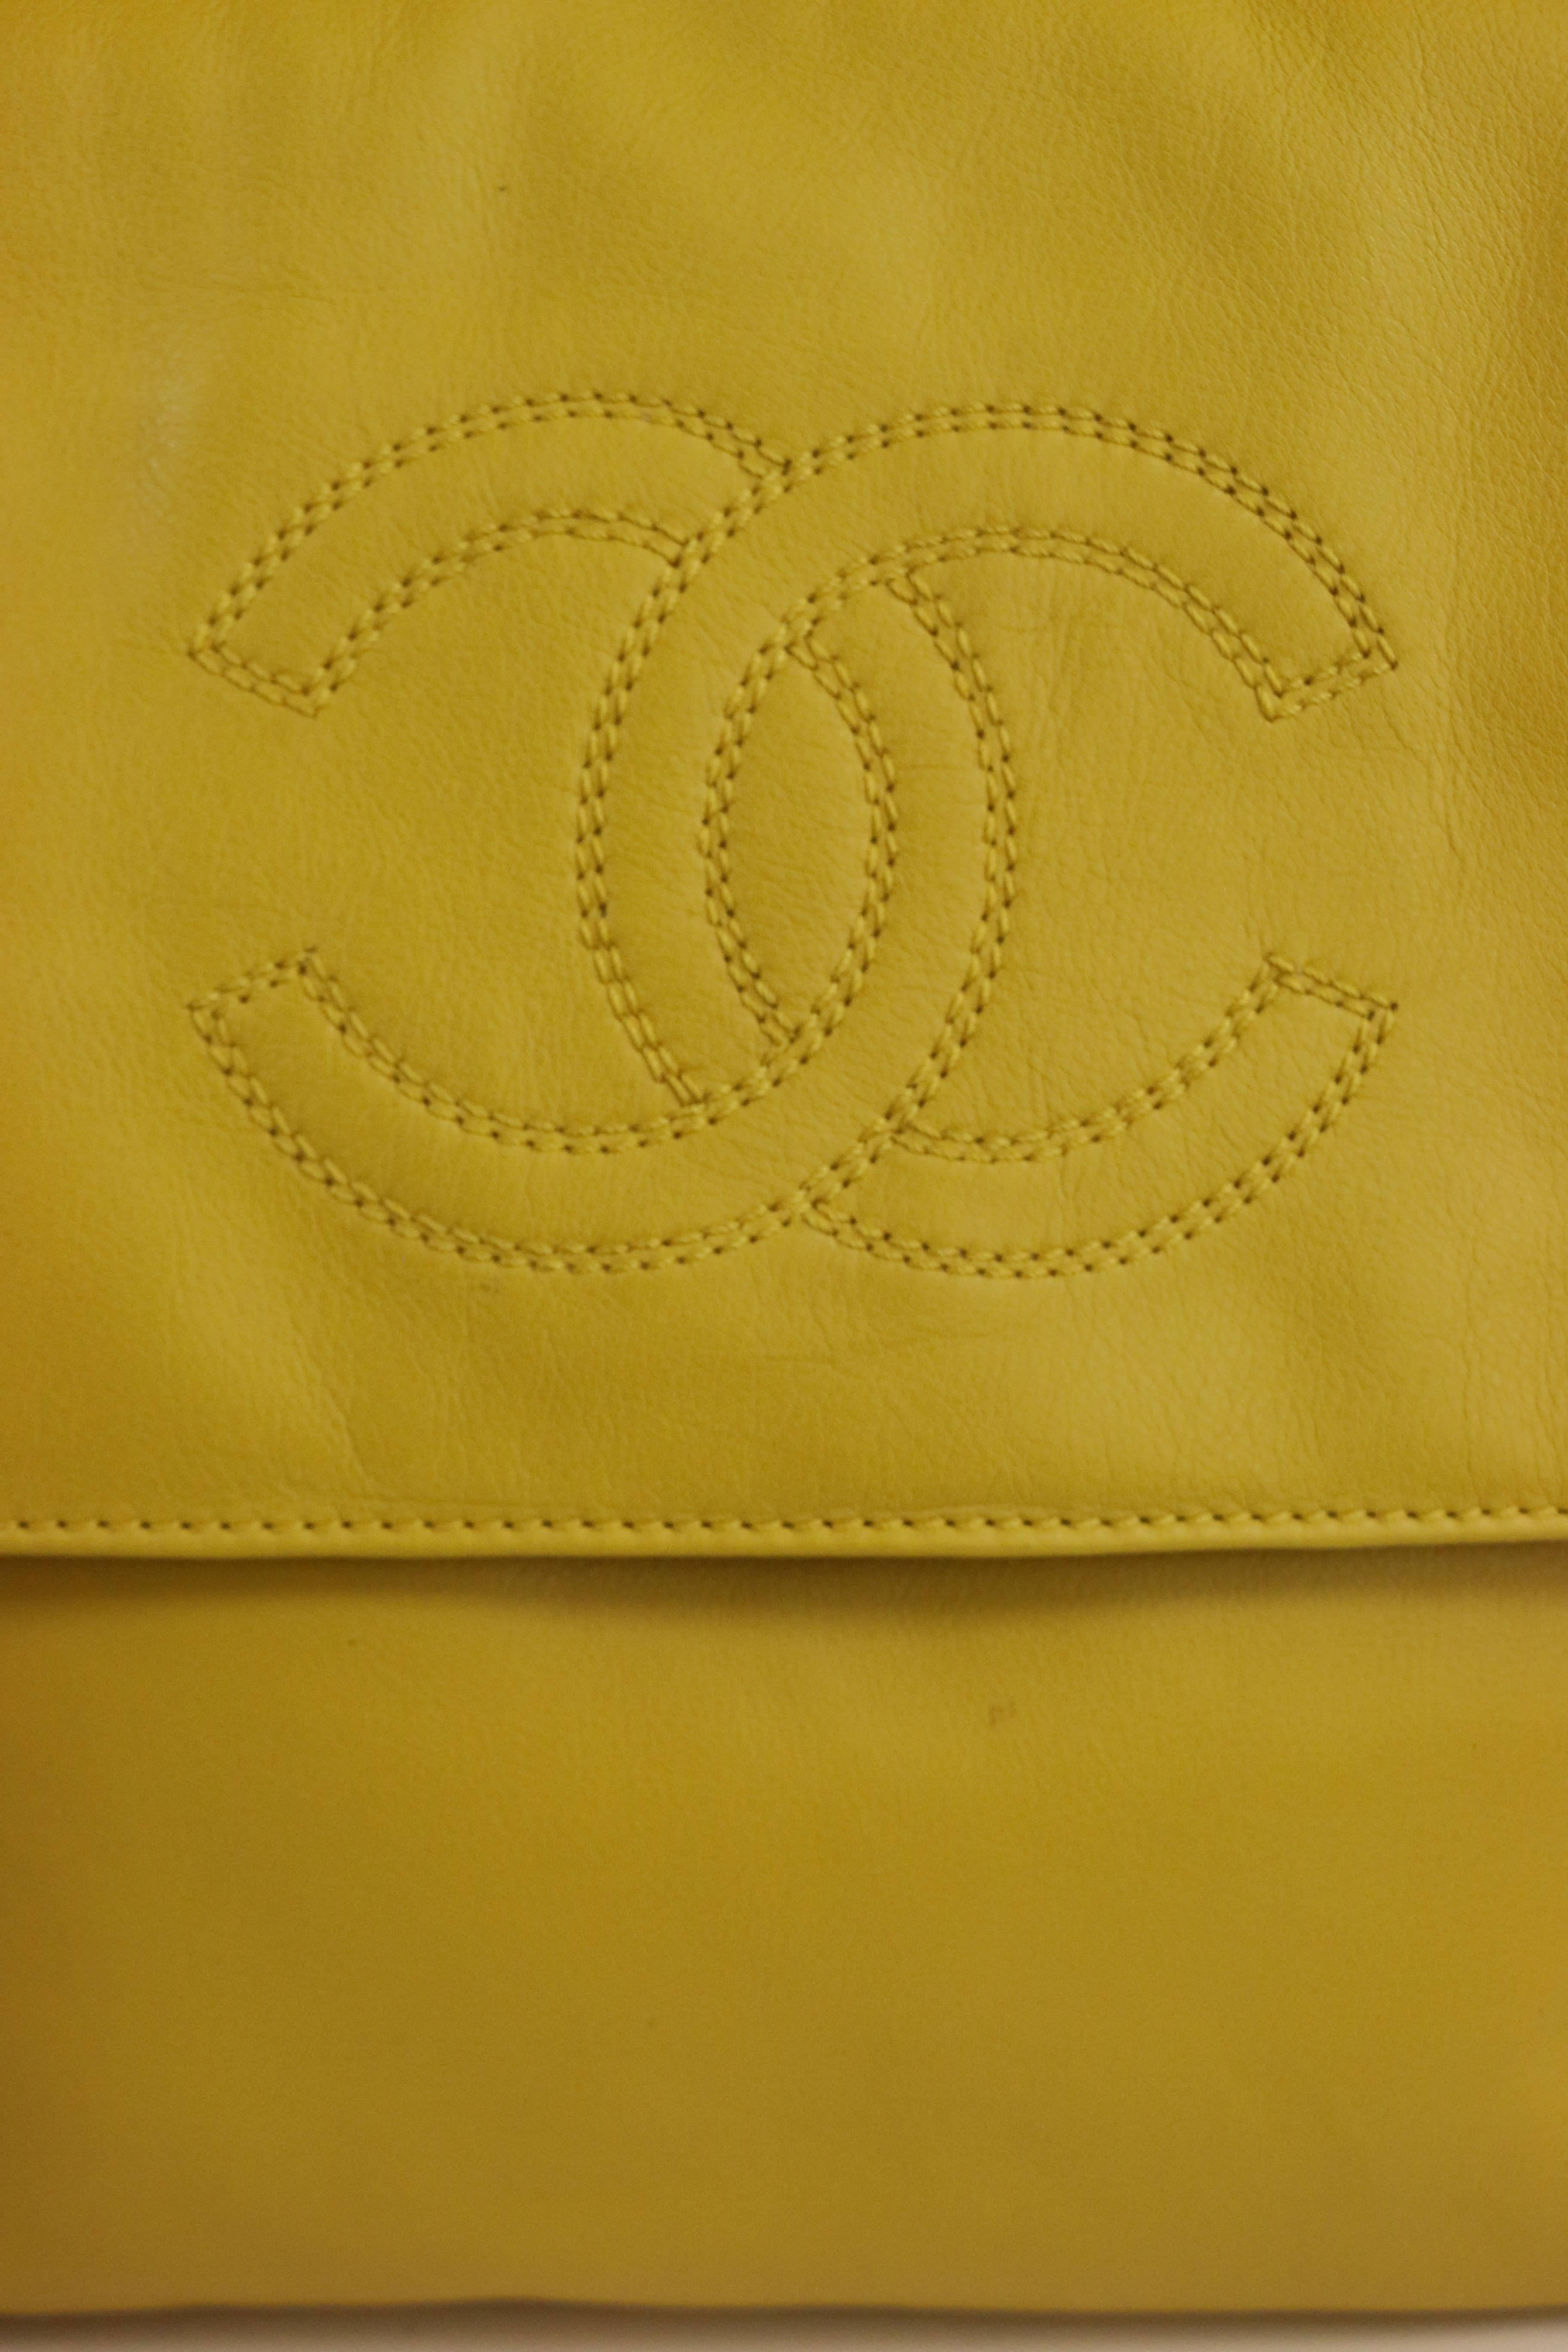 - Vintage 90s Chanel yellow lambskin leather shoulder strap flap bag. 

- Featuring "CC" stitching logo in front and one pocket at the back. Two interior zipper pockets. 

- Made In Italy. 

- Height: 9in, Length: 9in, Strap: 14in. 

-